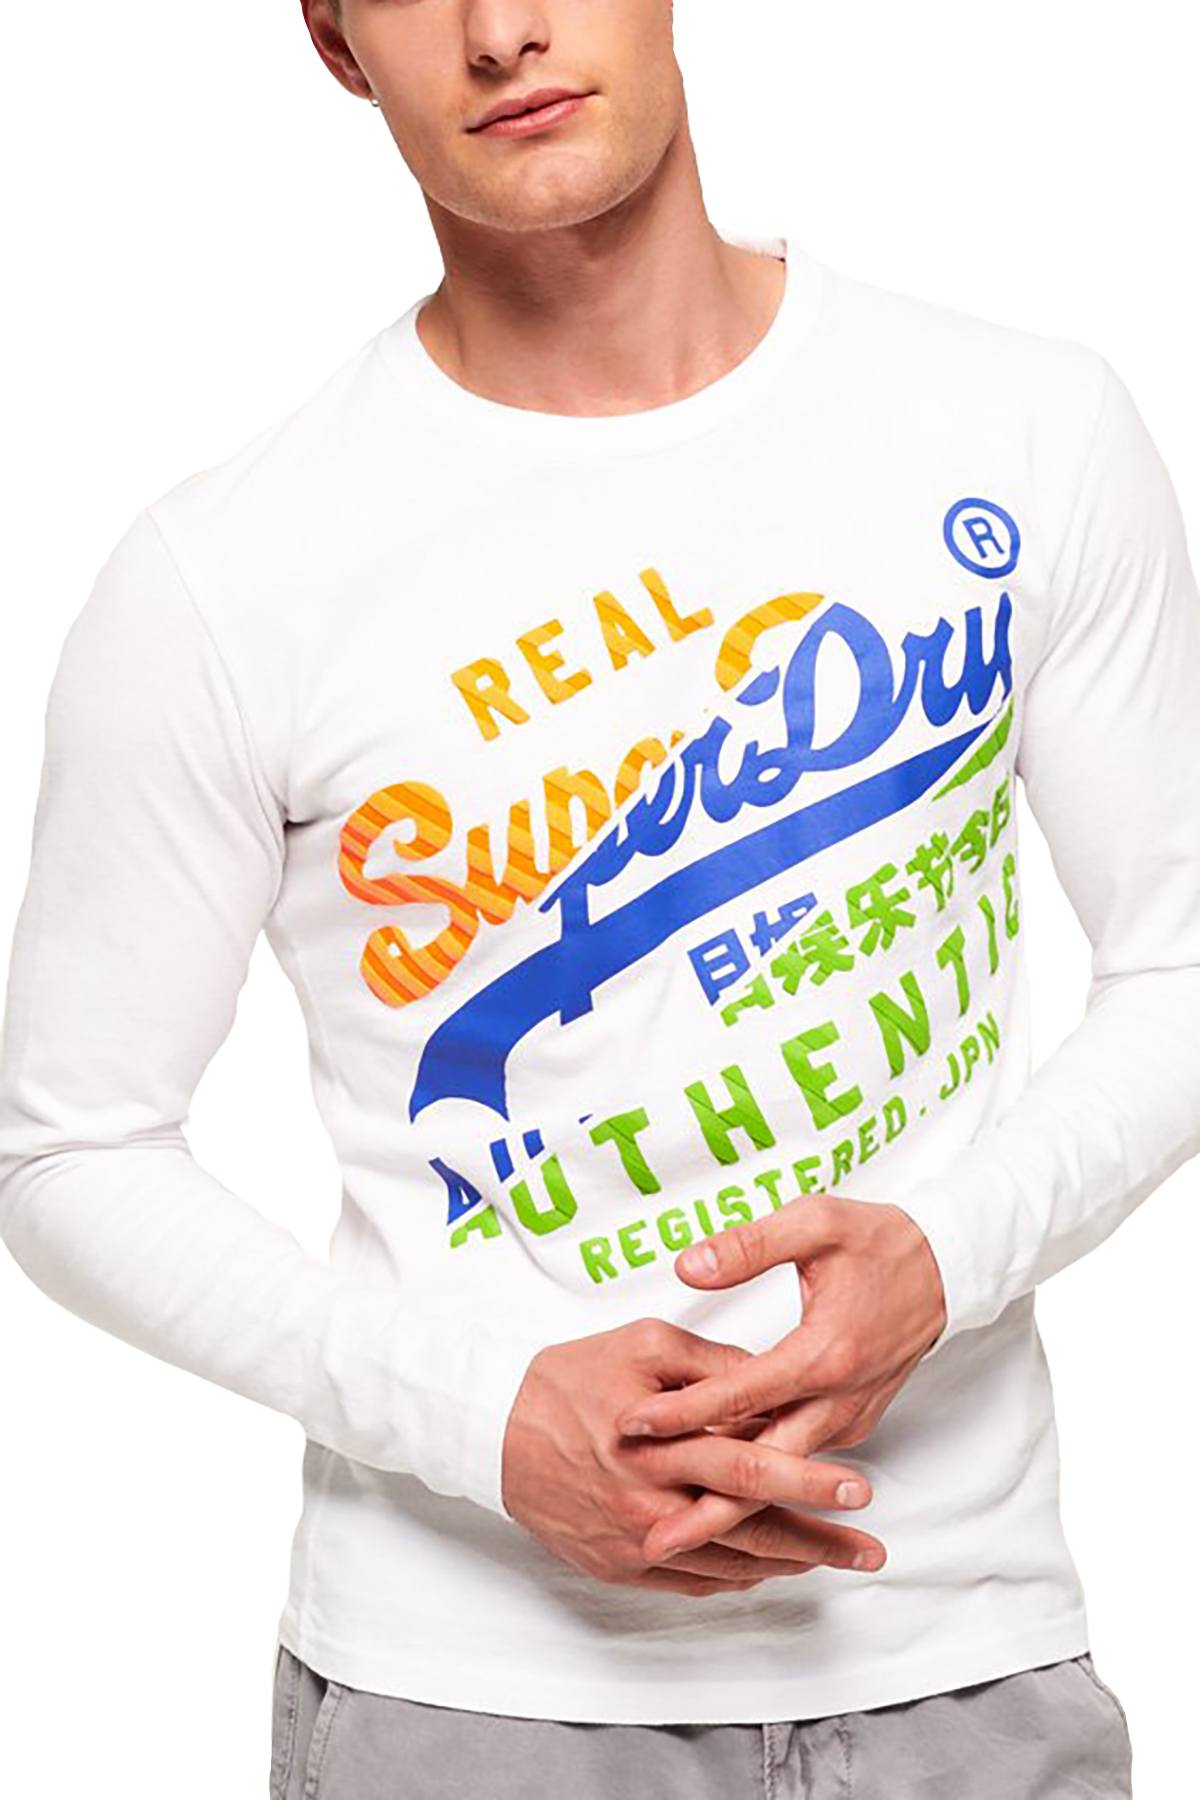 SuperDry Optic-White Vintage Authentic XL Long-Sleeve T-Shirt